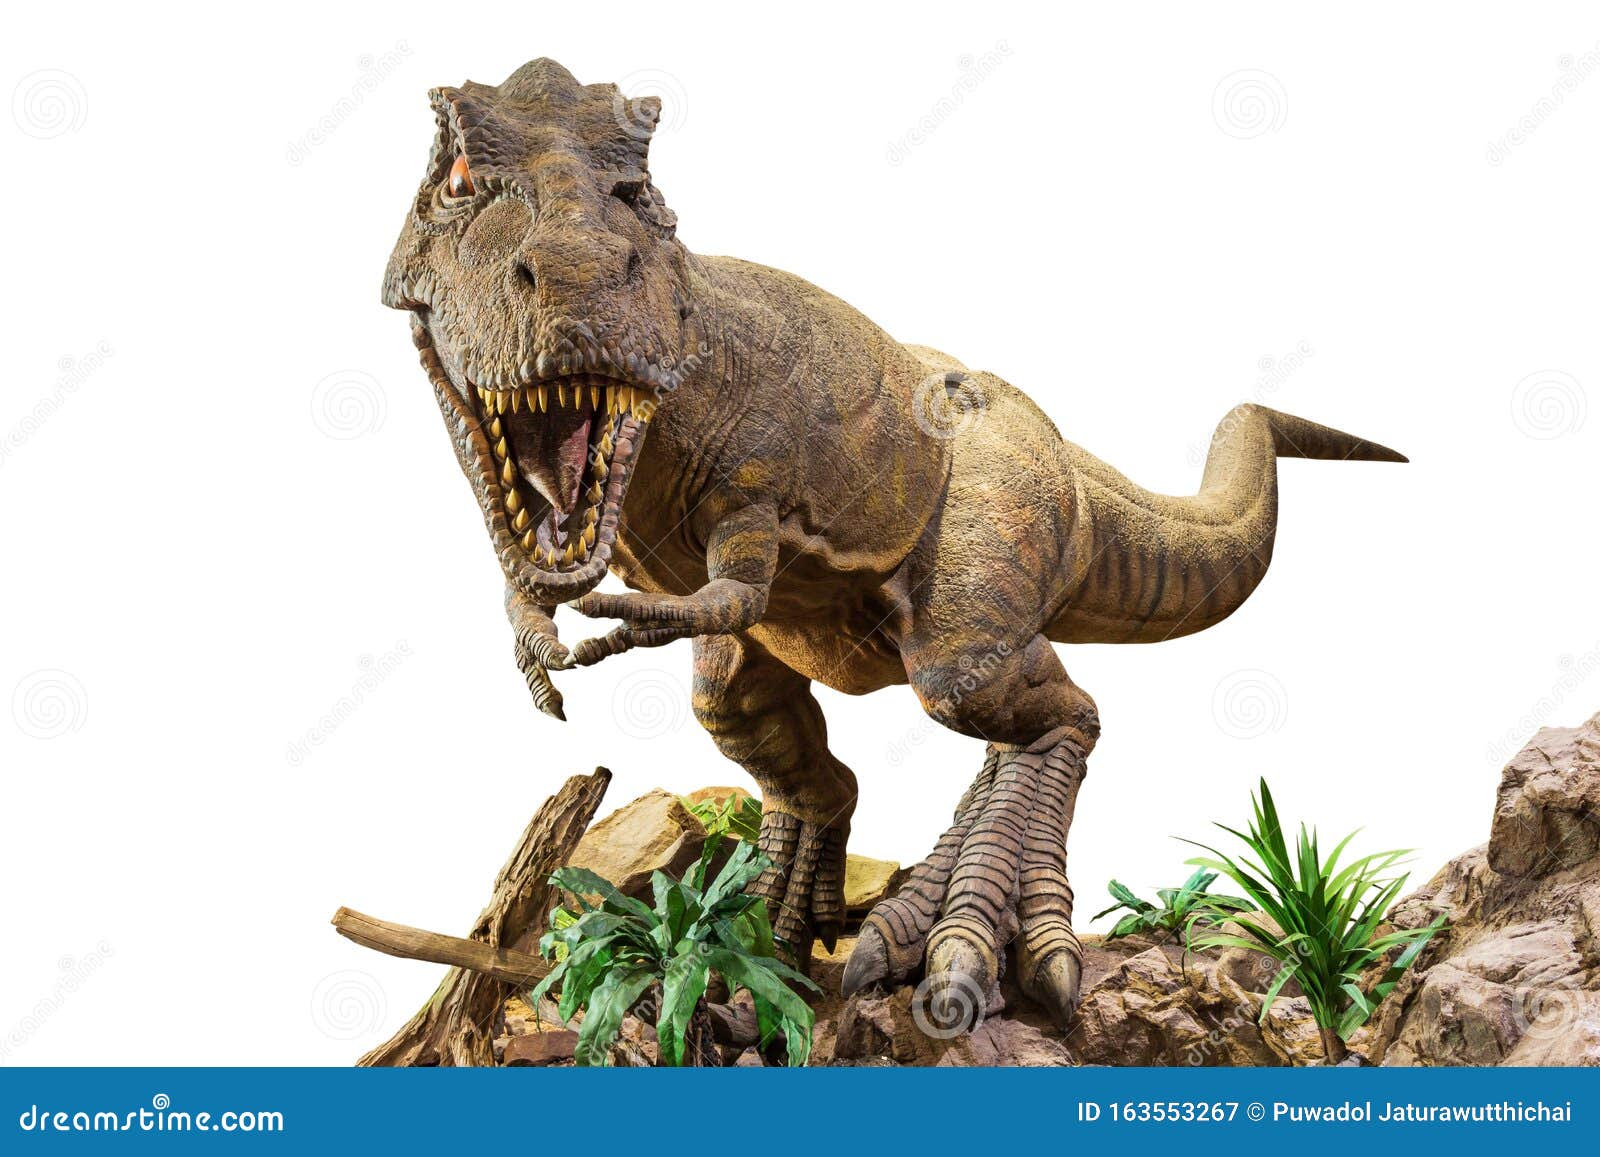 tyrannosaurus rex . t-rex is walking , growling and open mouth on rock . white  background . embedded clipping paths